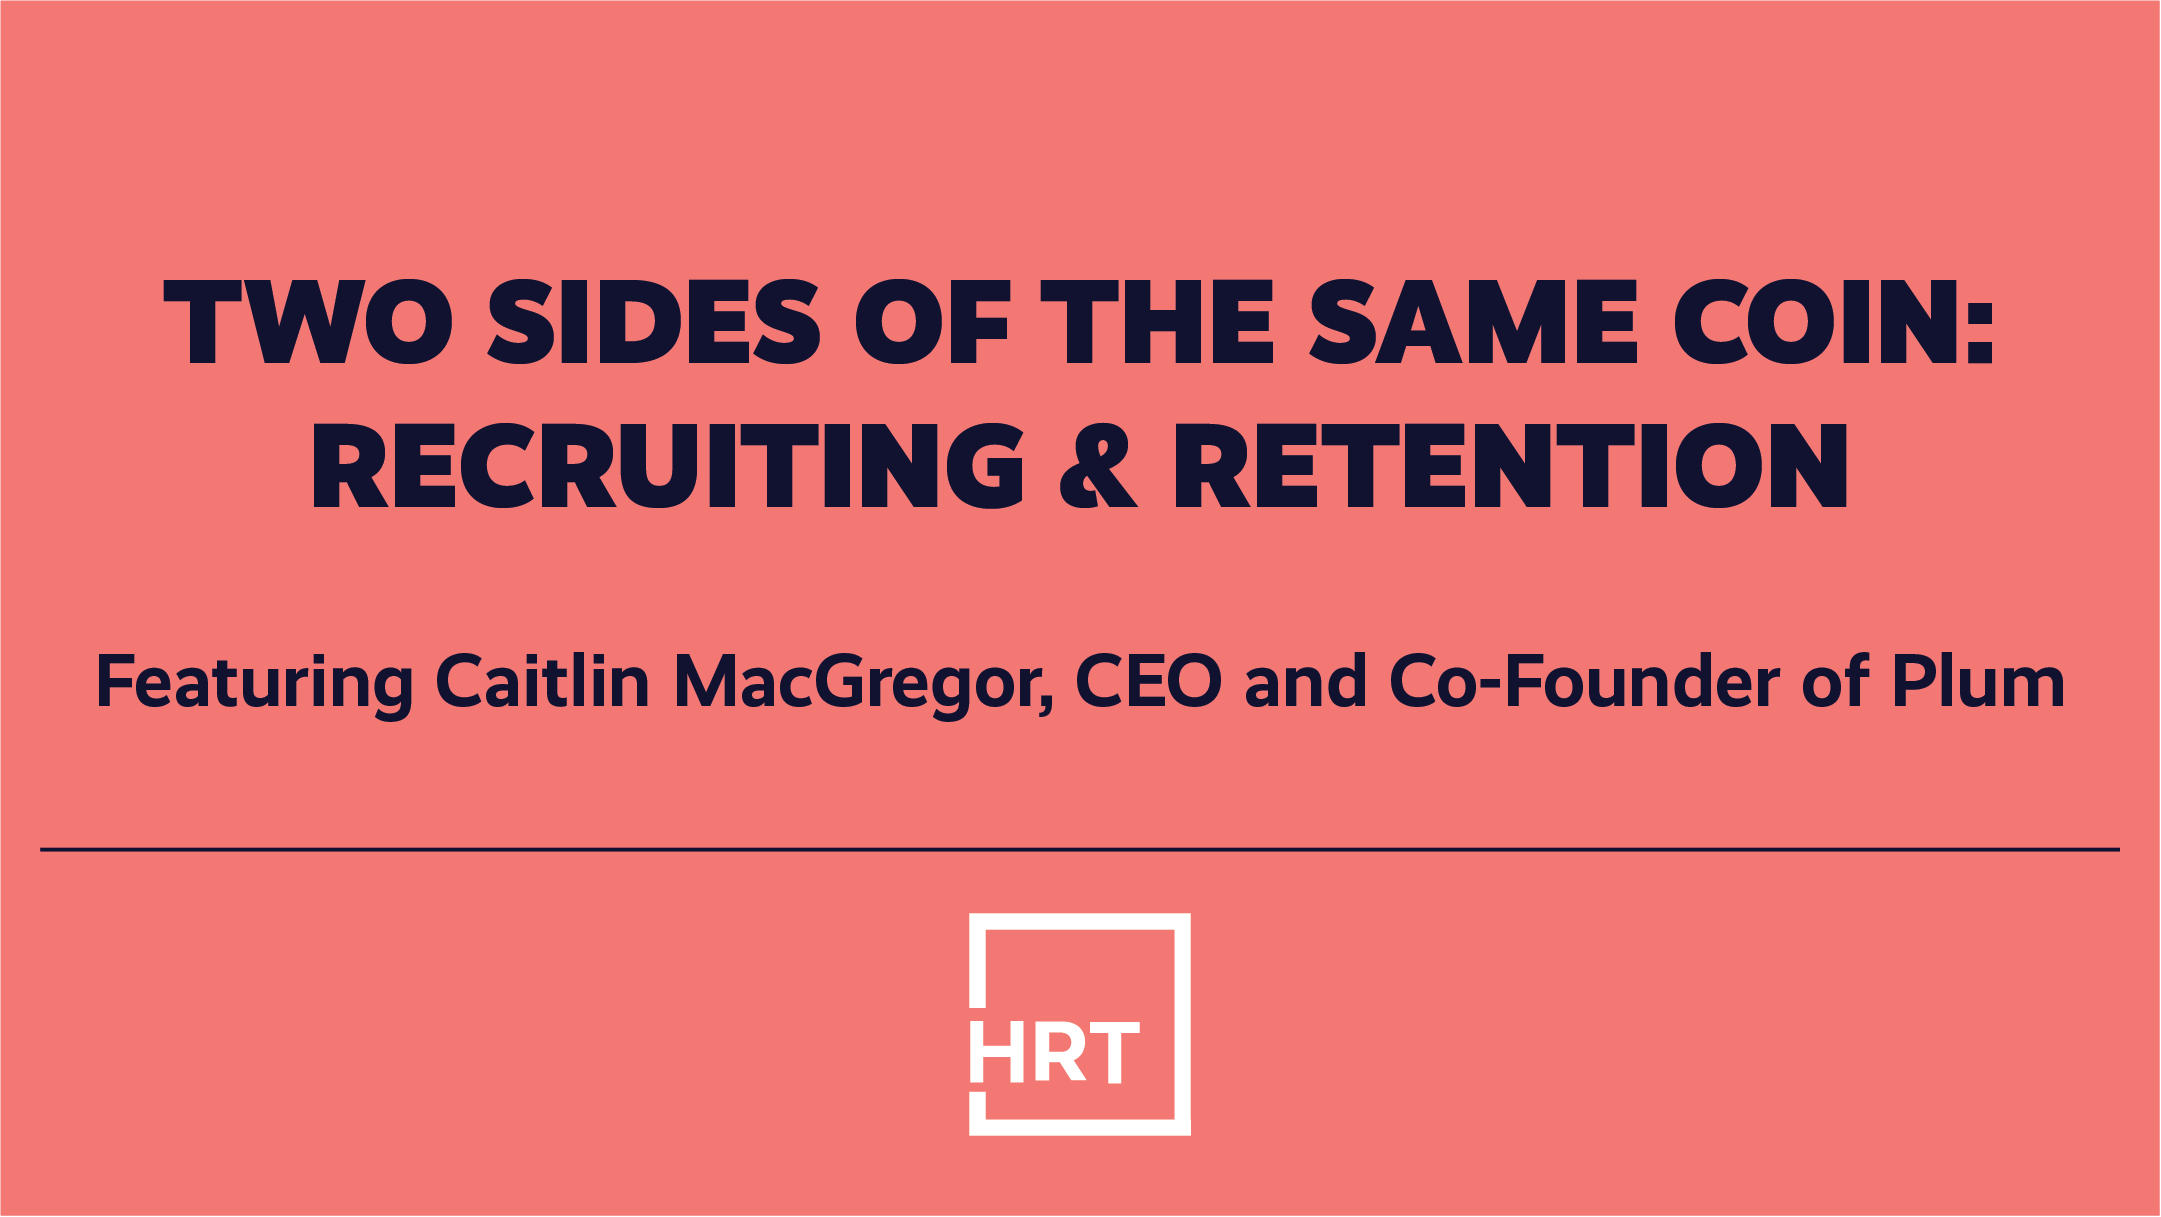 HRToday: Two Sides of the Same Coin: Recruiting & Retention